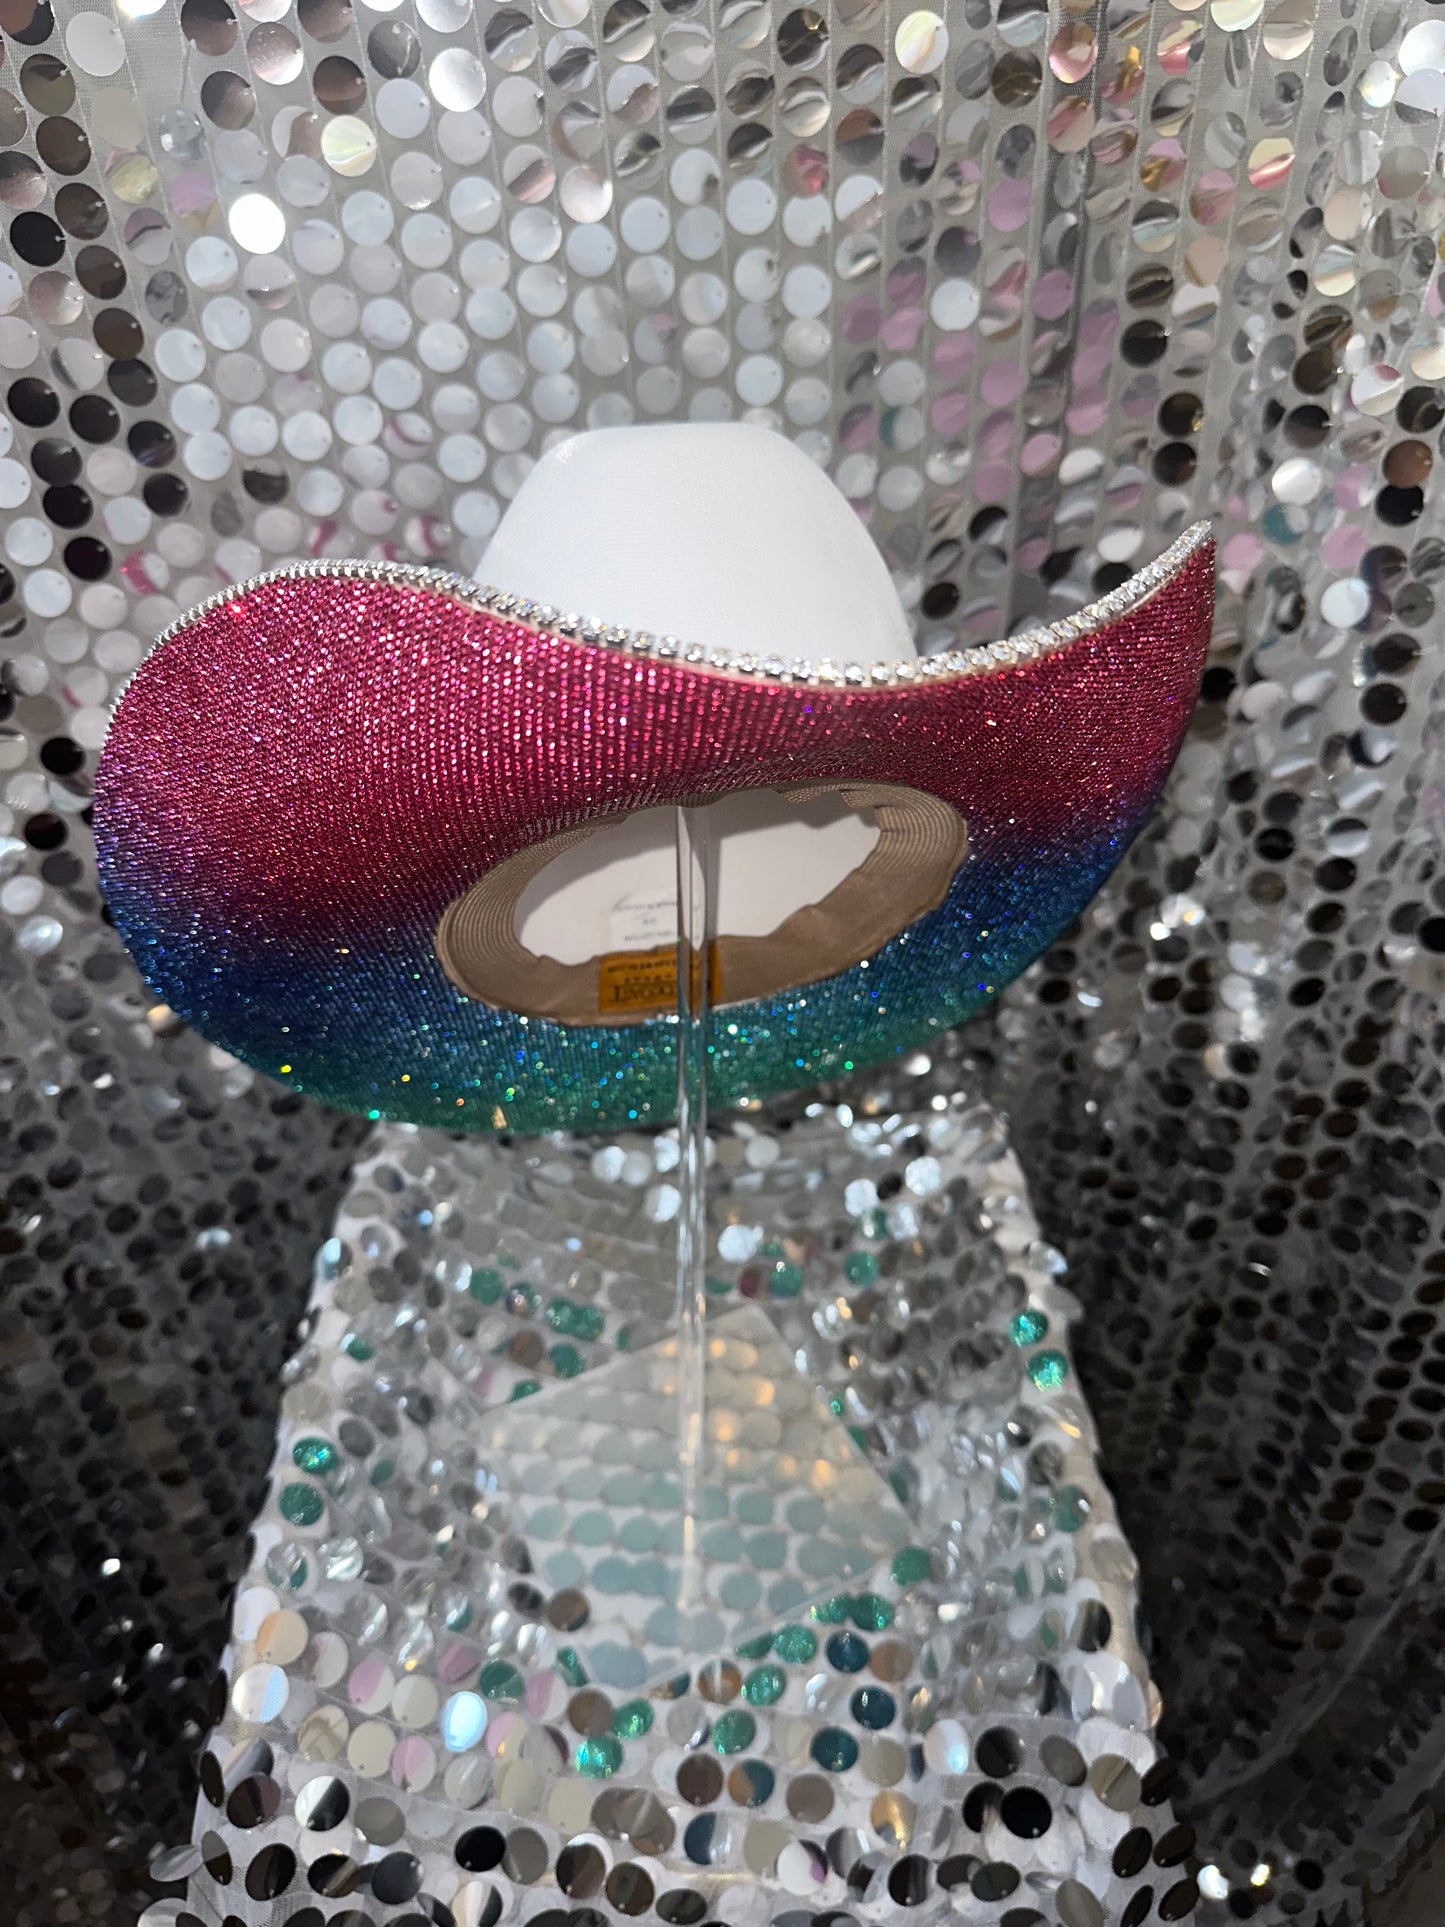 The bejeweled hat